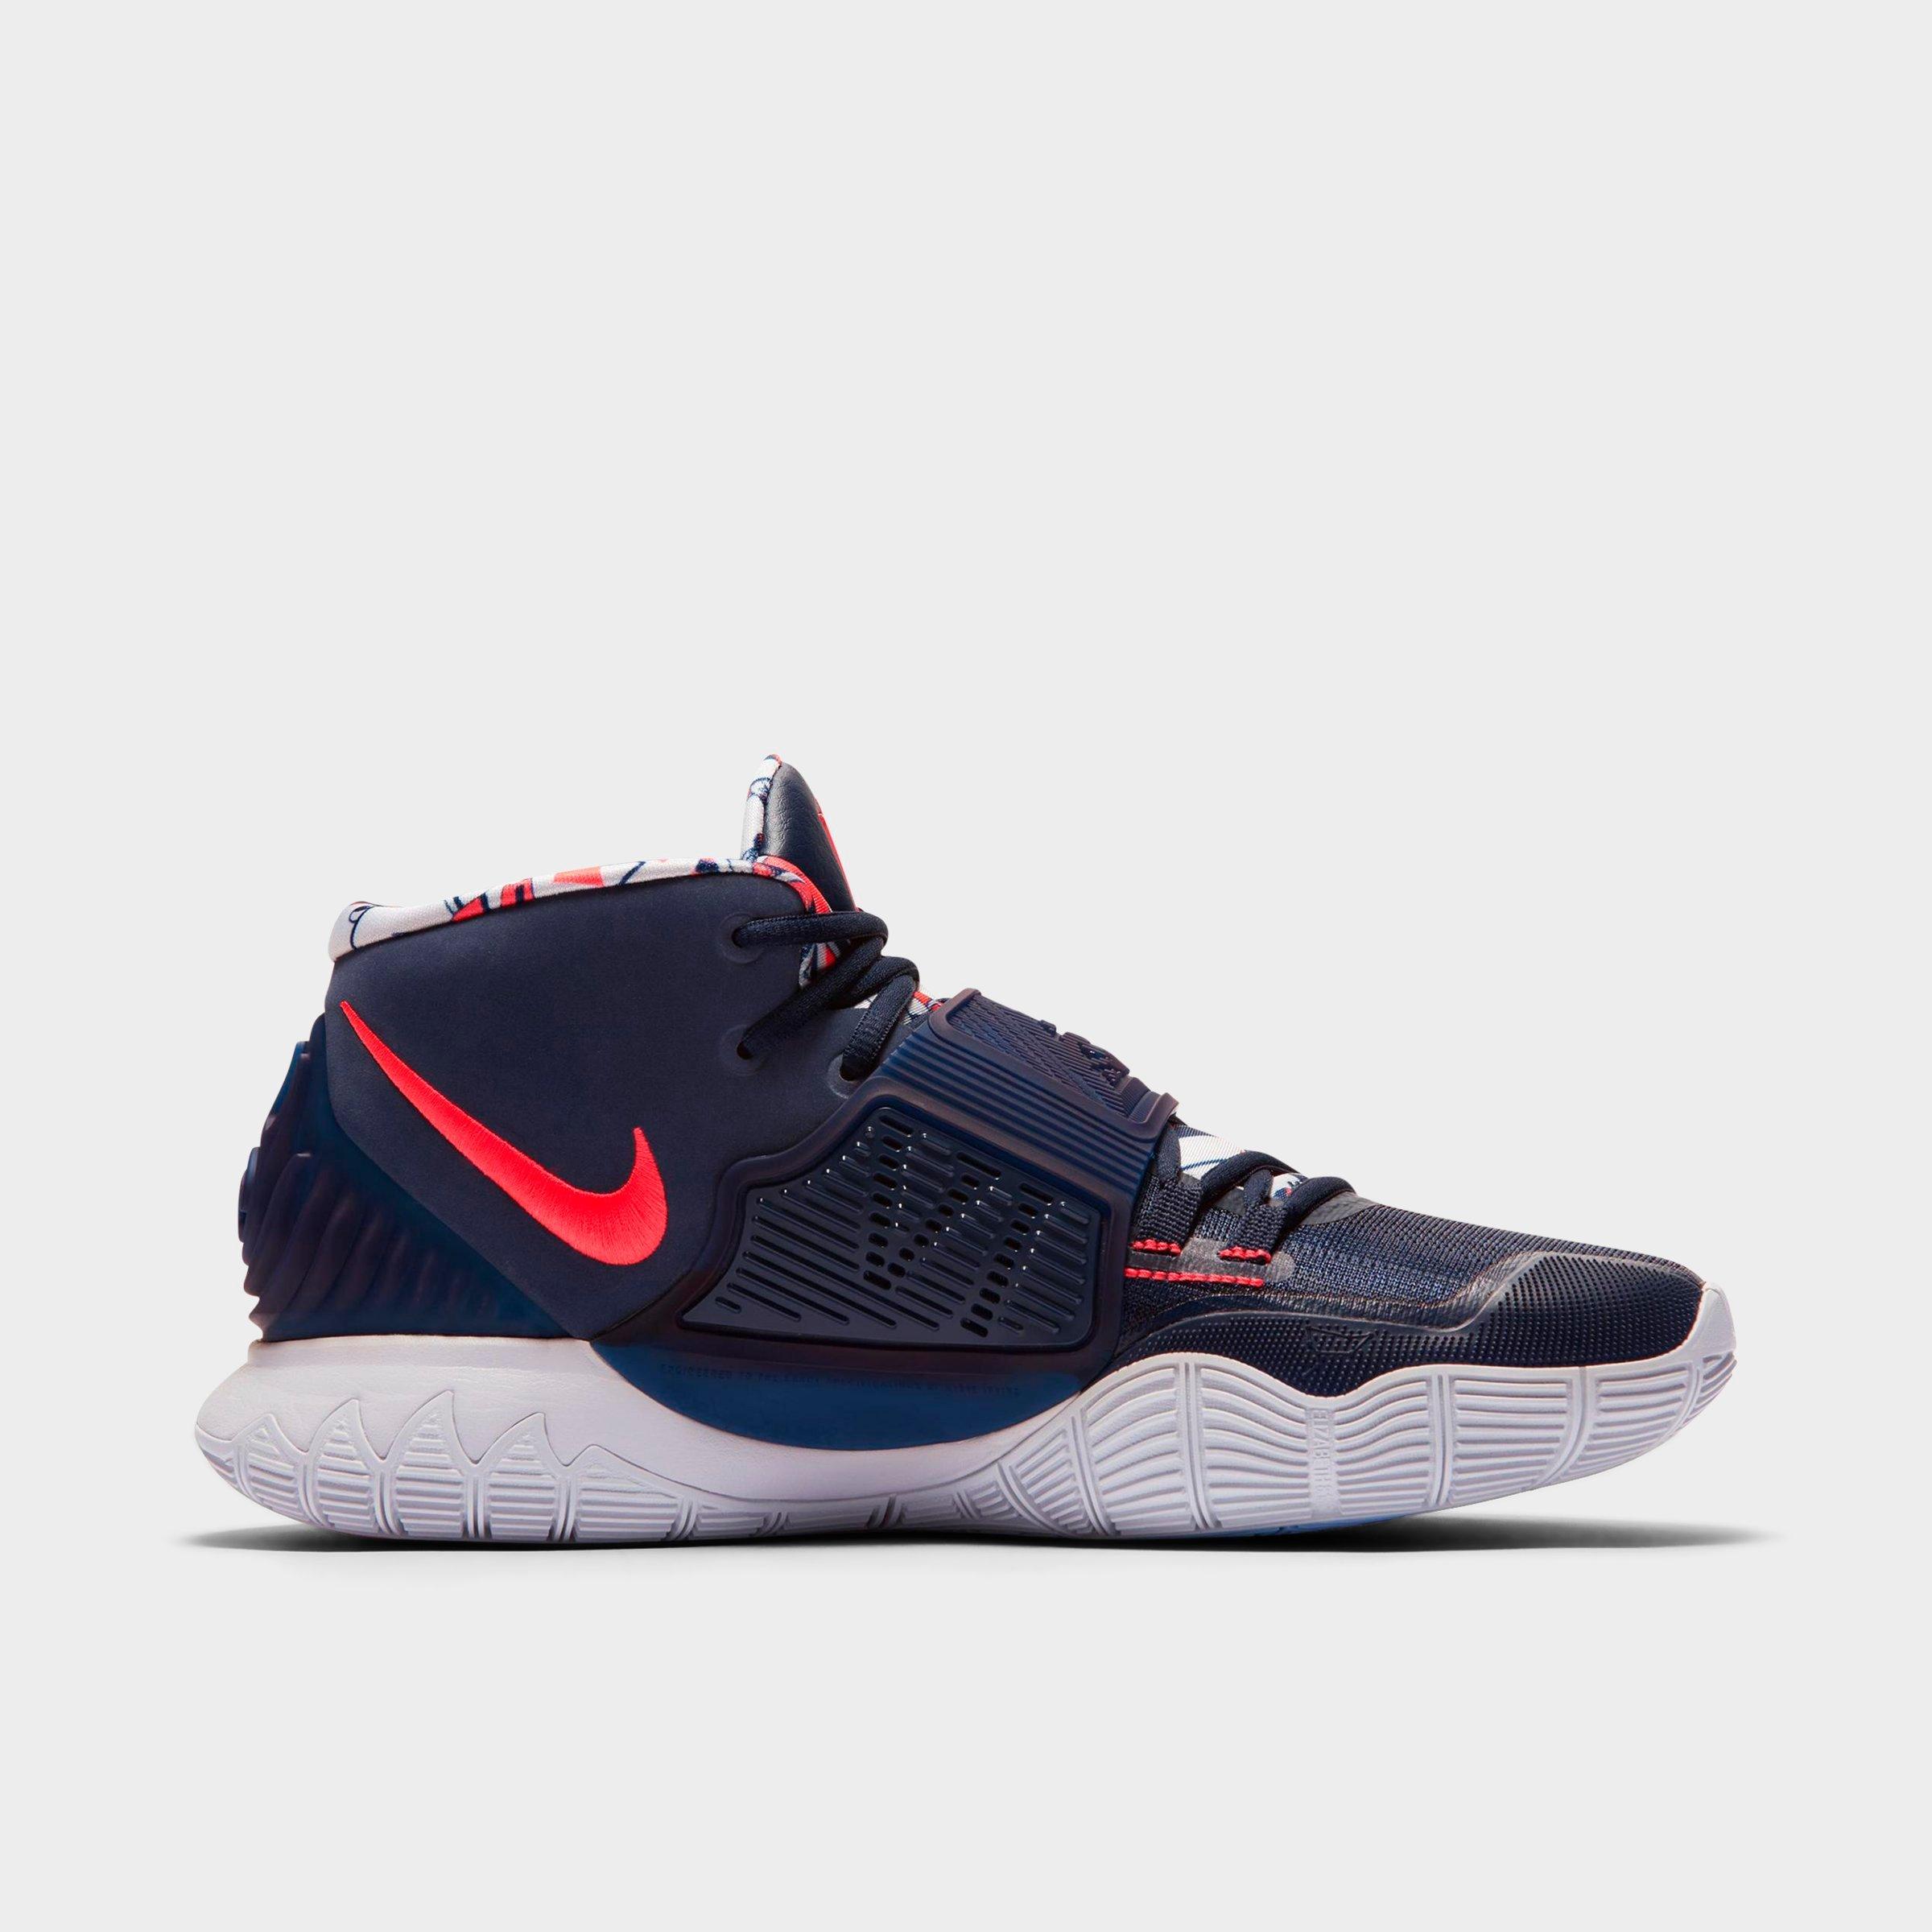 finish line kyrie 6